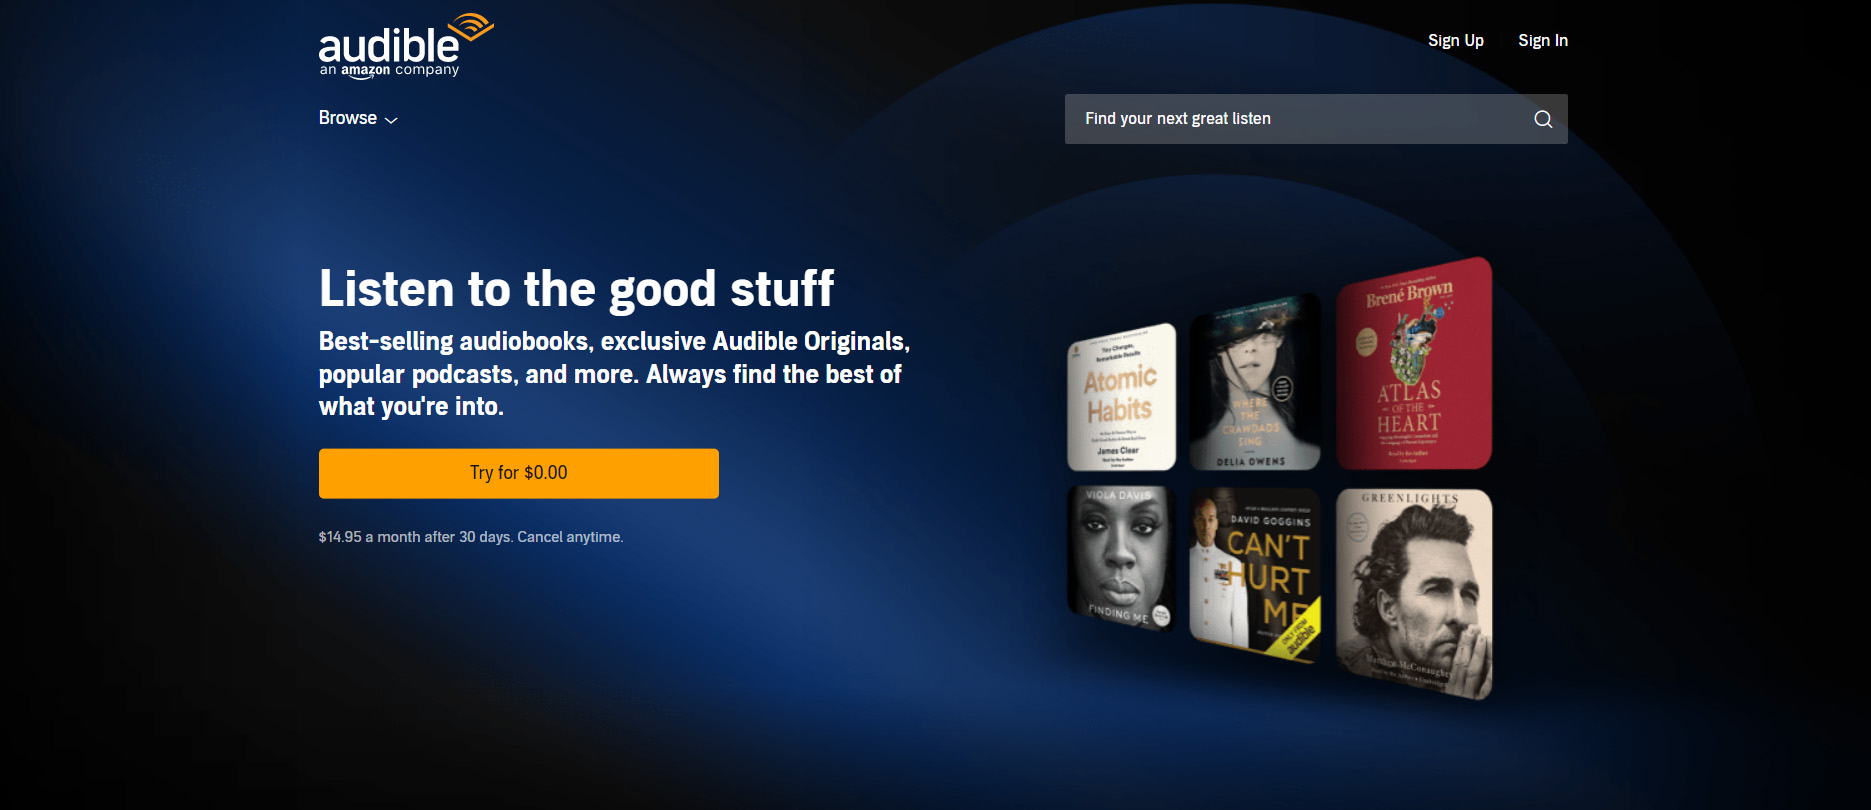 New offer launched: Audible Affiliate Program